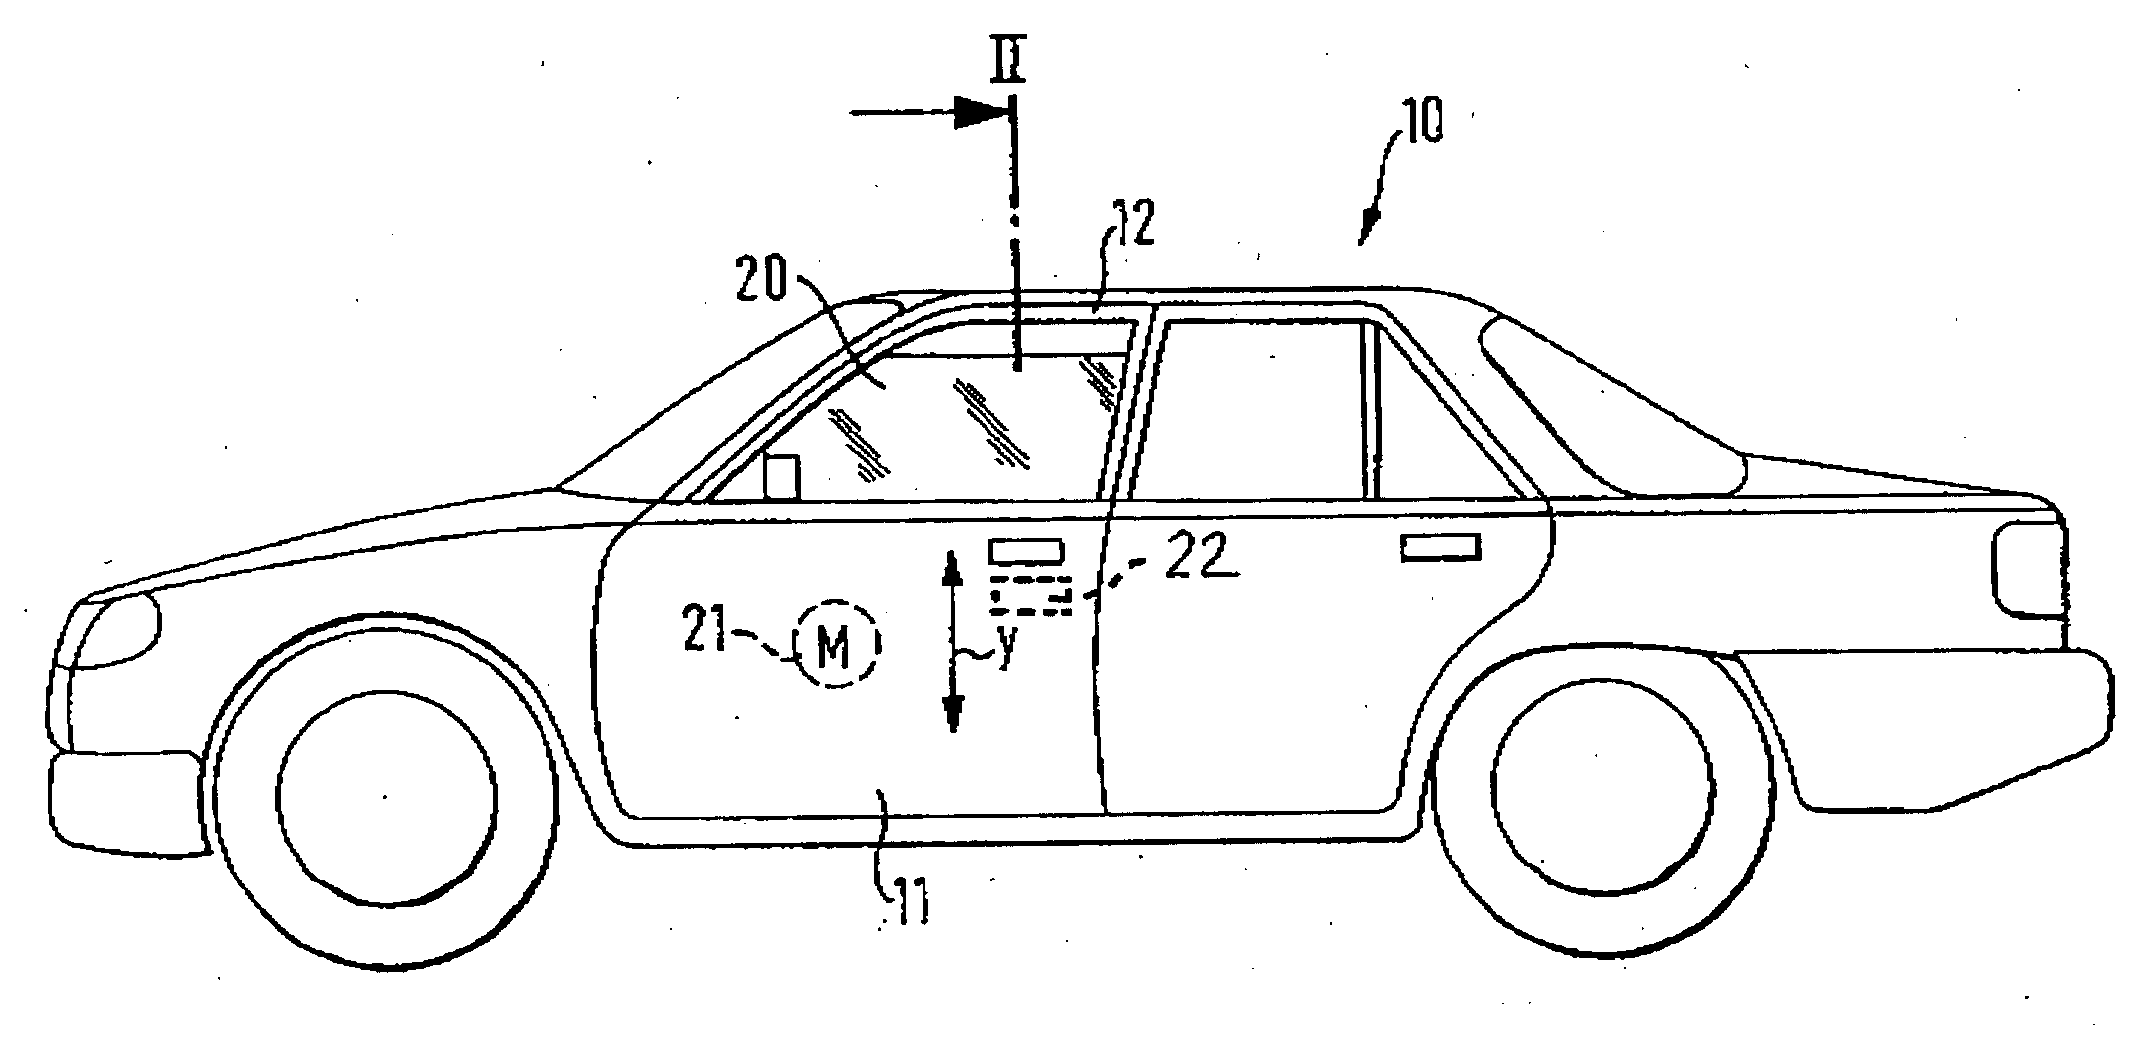 Apparatus for controlling and sensing moisture on a movable closure member, more particularly an electrically powered automotive window pane